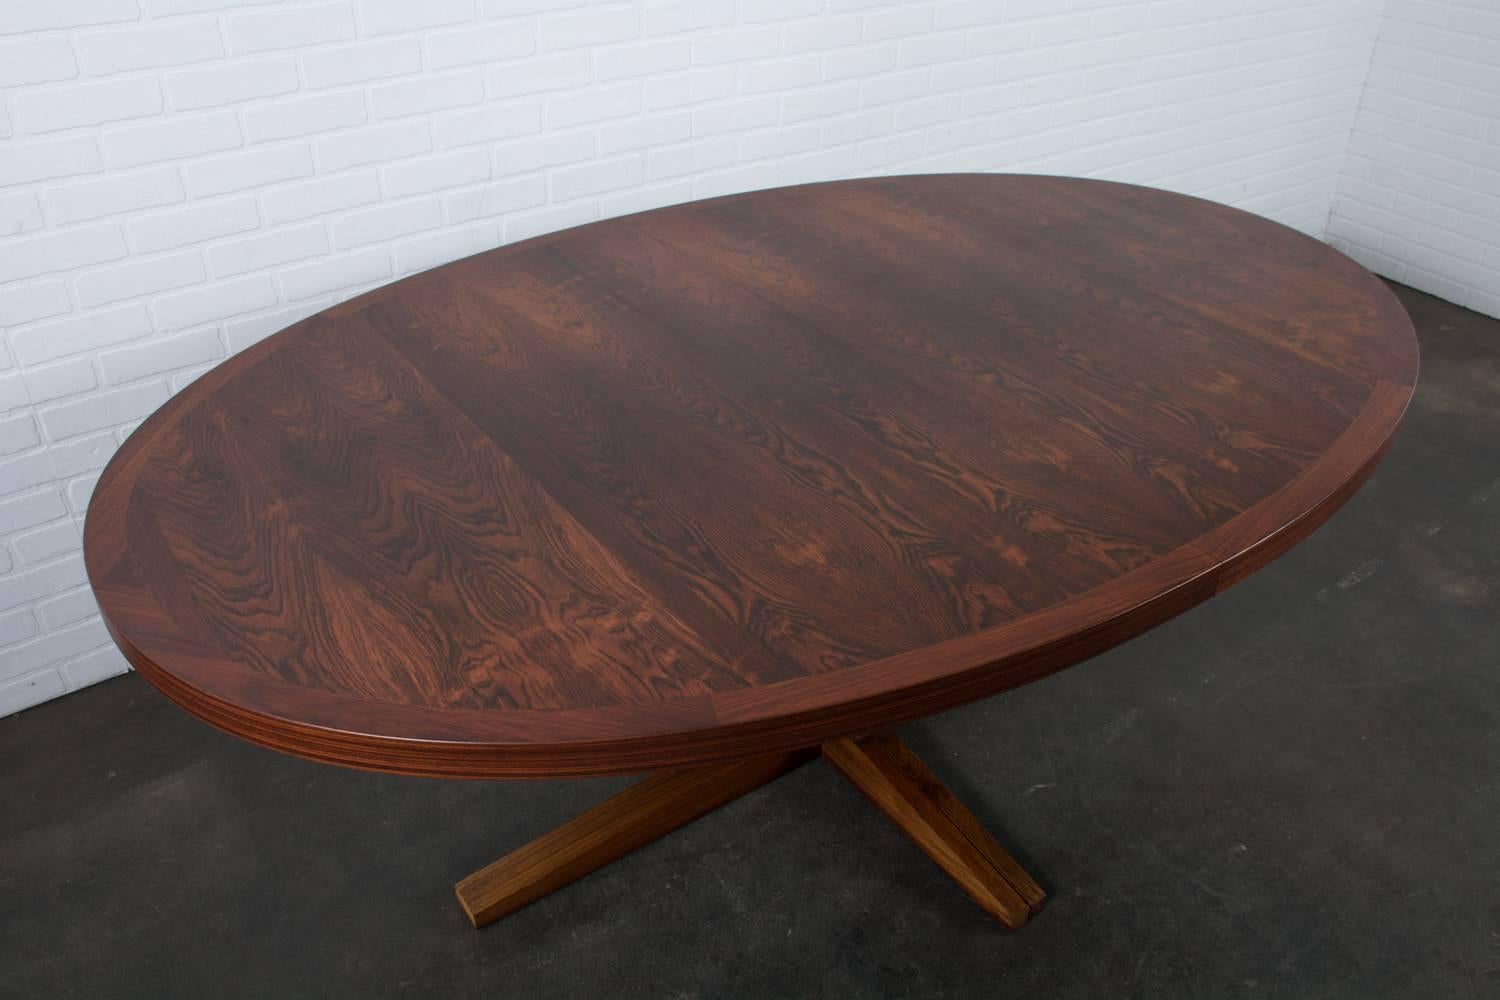 Scandinavian Modern Vintage Mid-Century Rosewood Oval Table with Leaves